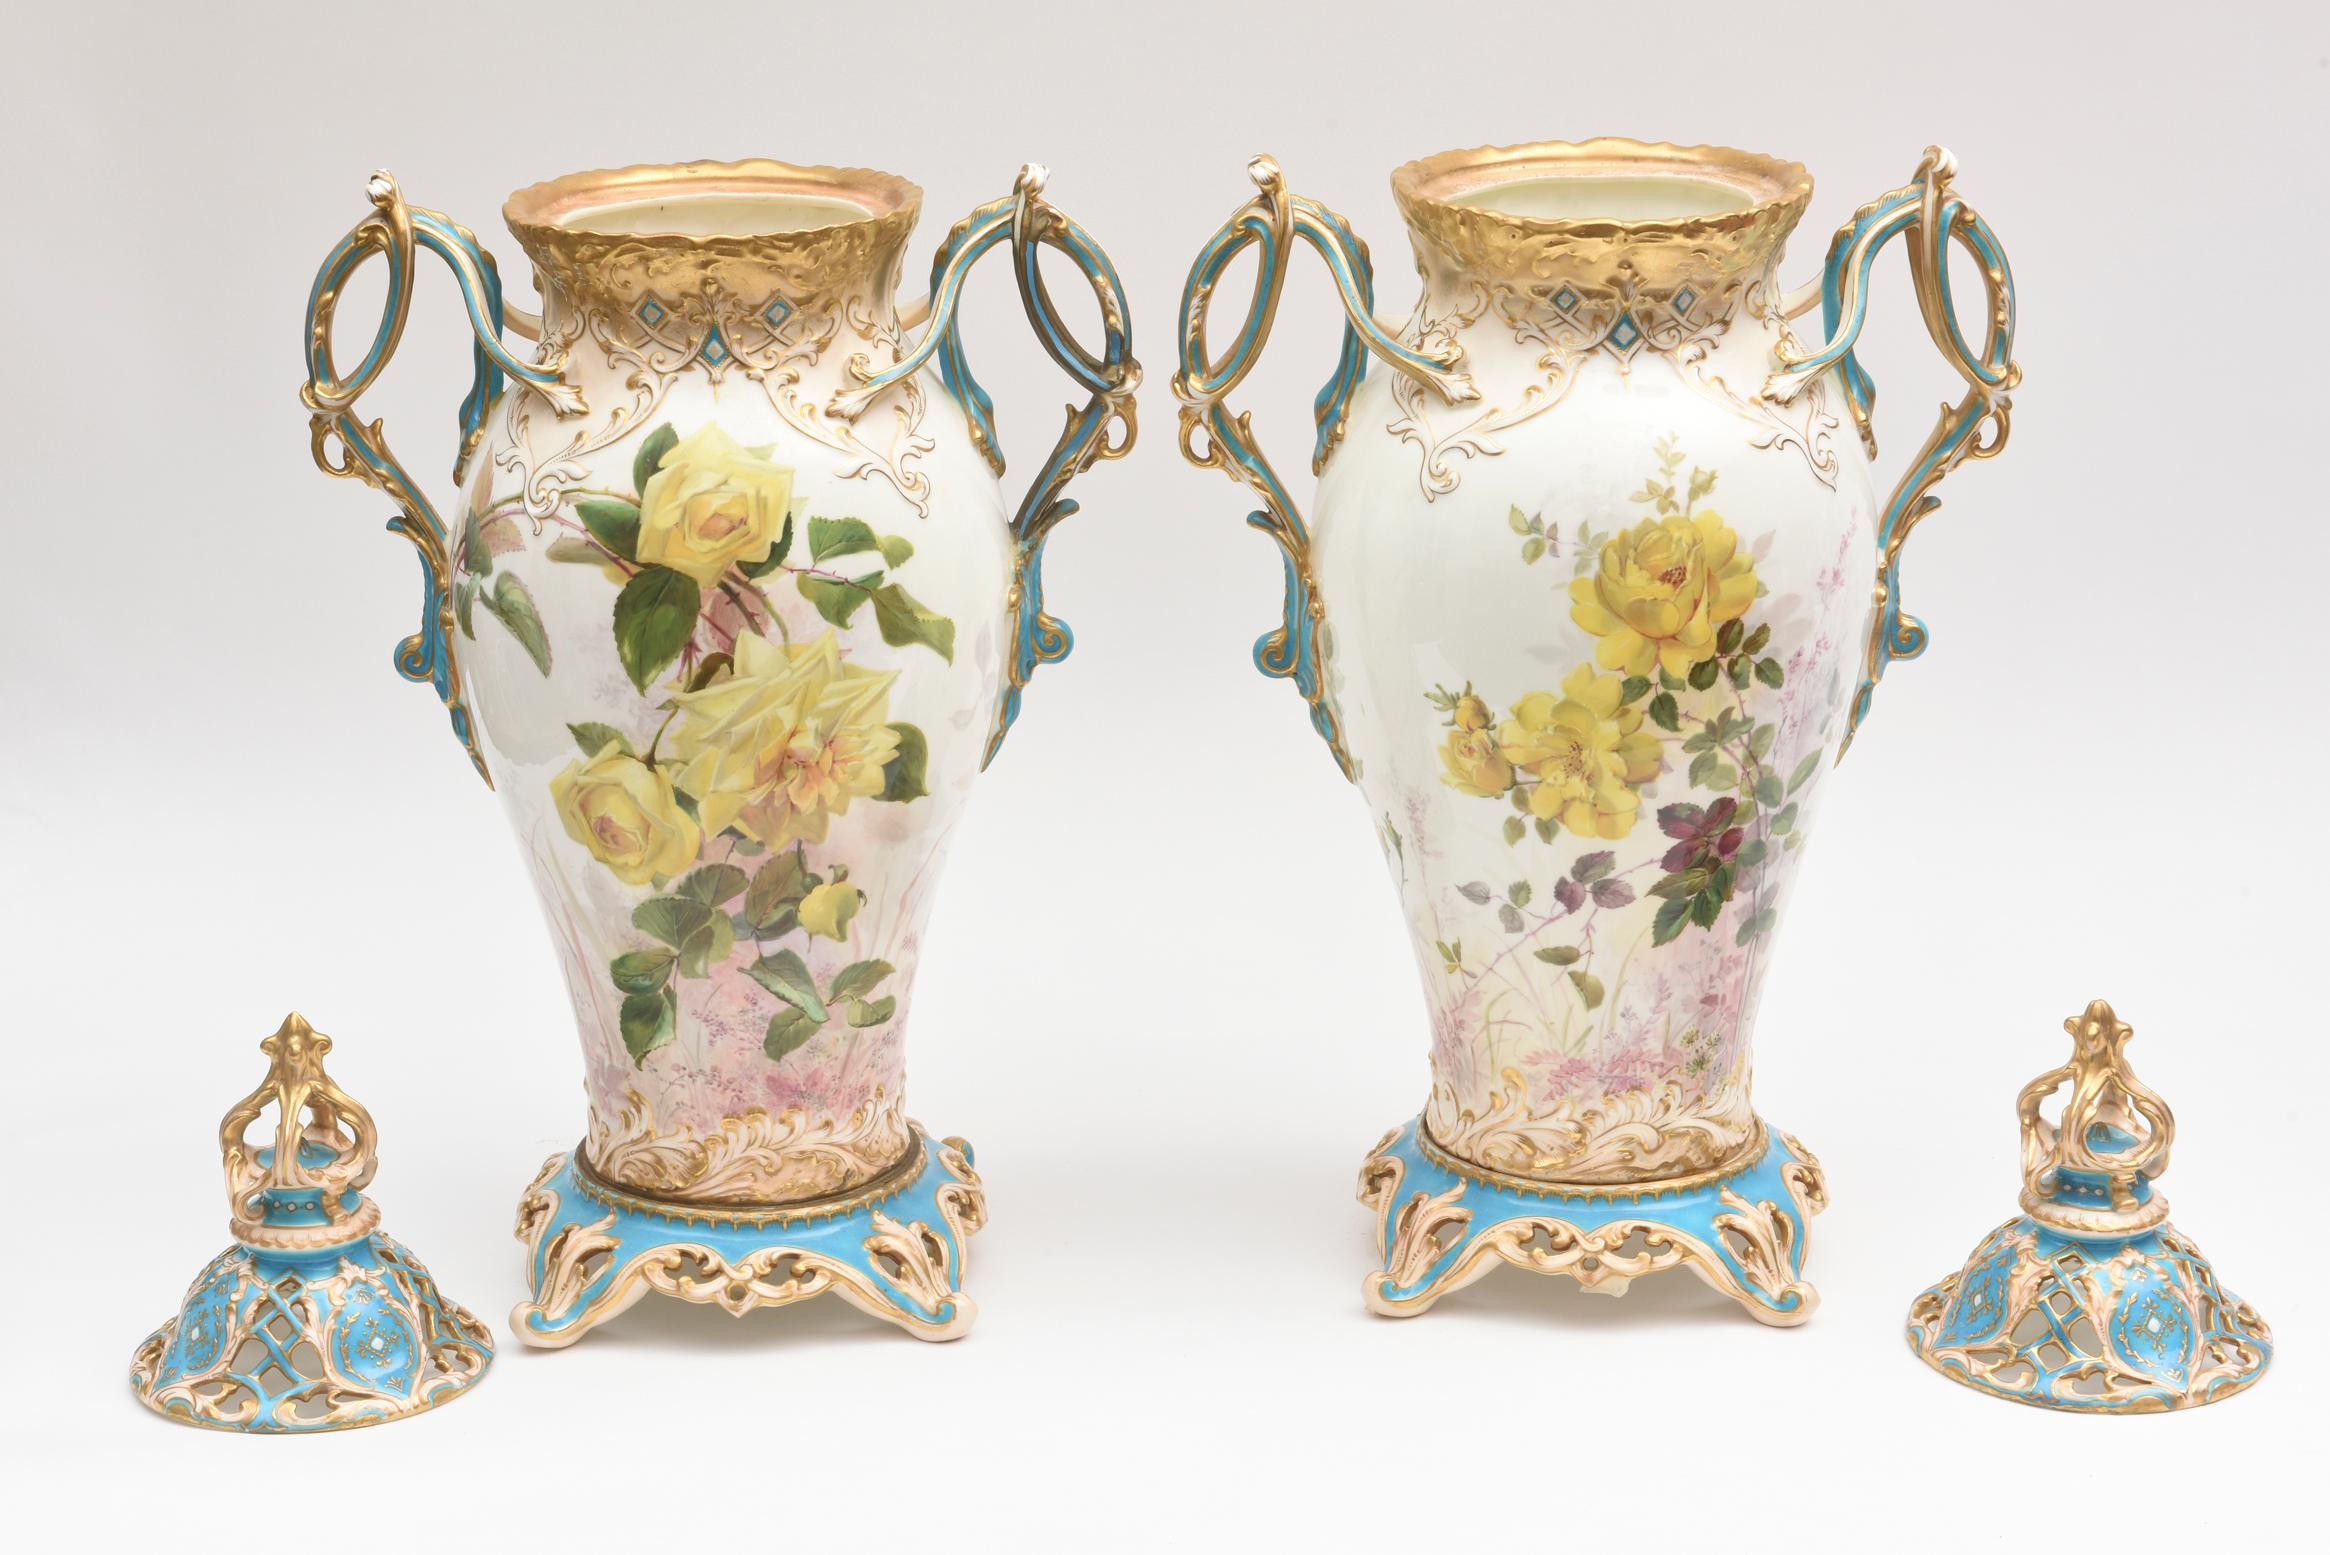 Late 19th Century 19th Century English Covered Vases, Vibrant Turquoise, Exquisitely Crafted, Pair